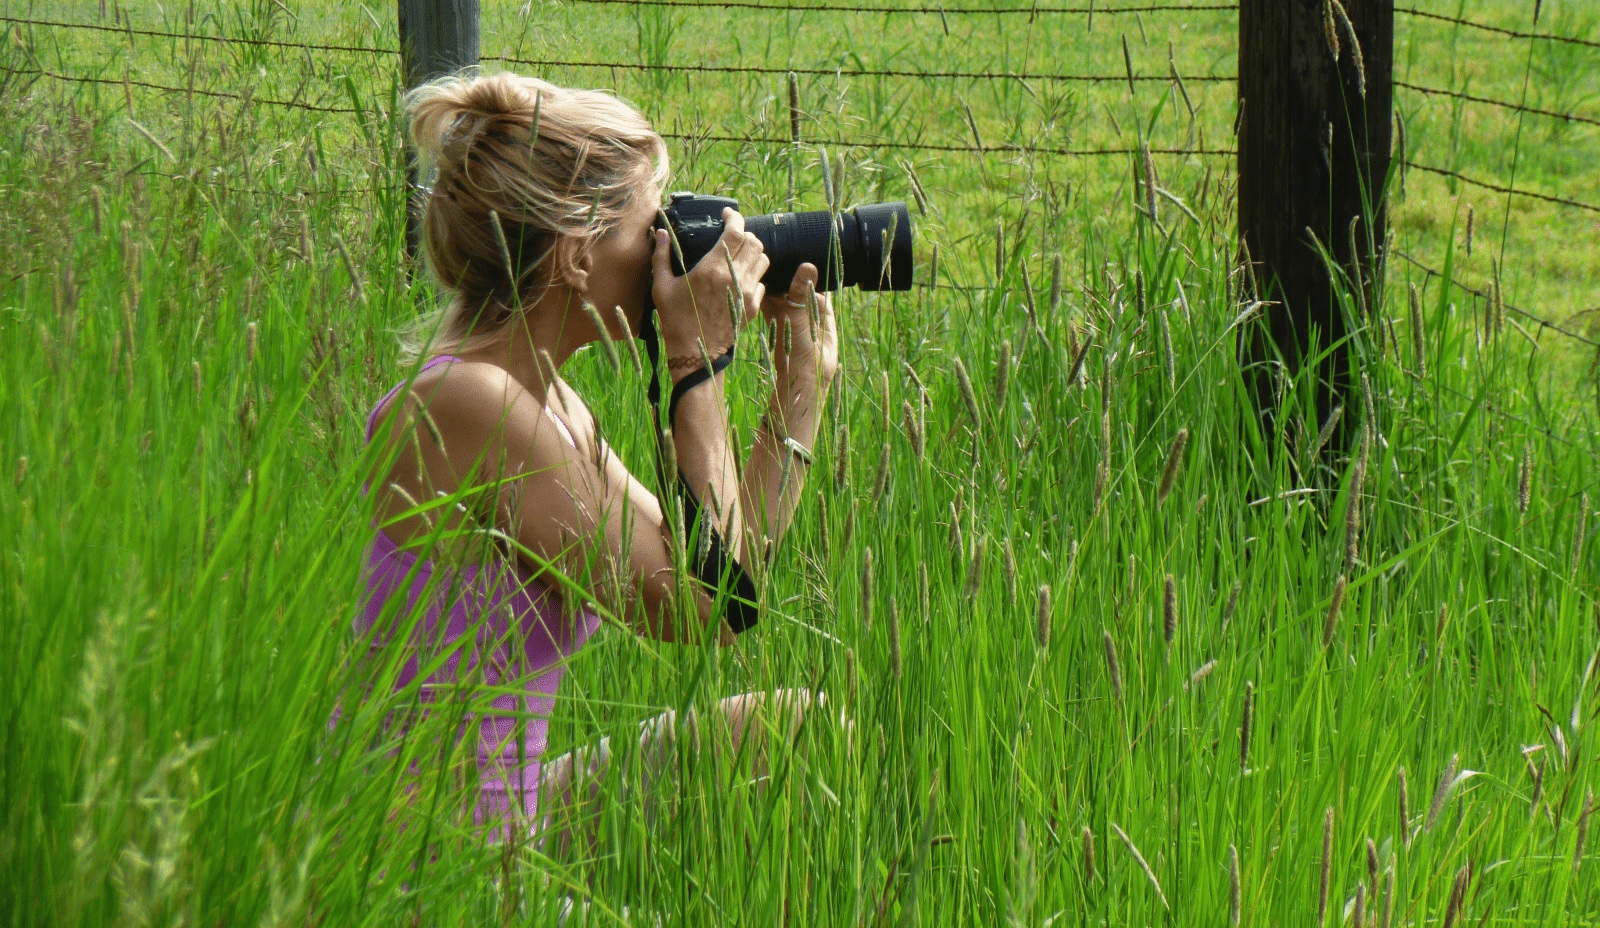 a woman holds a camera to her eye in a grassy field